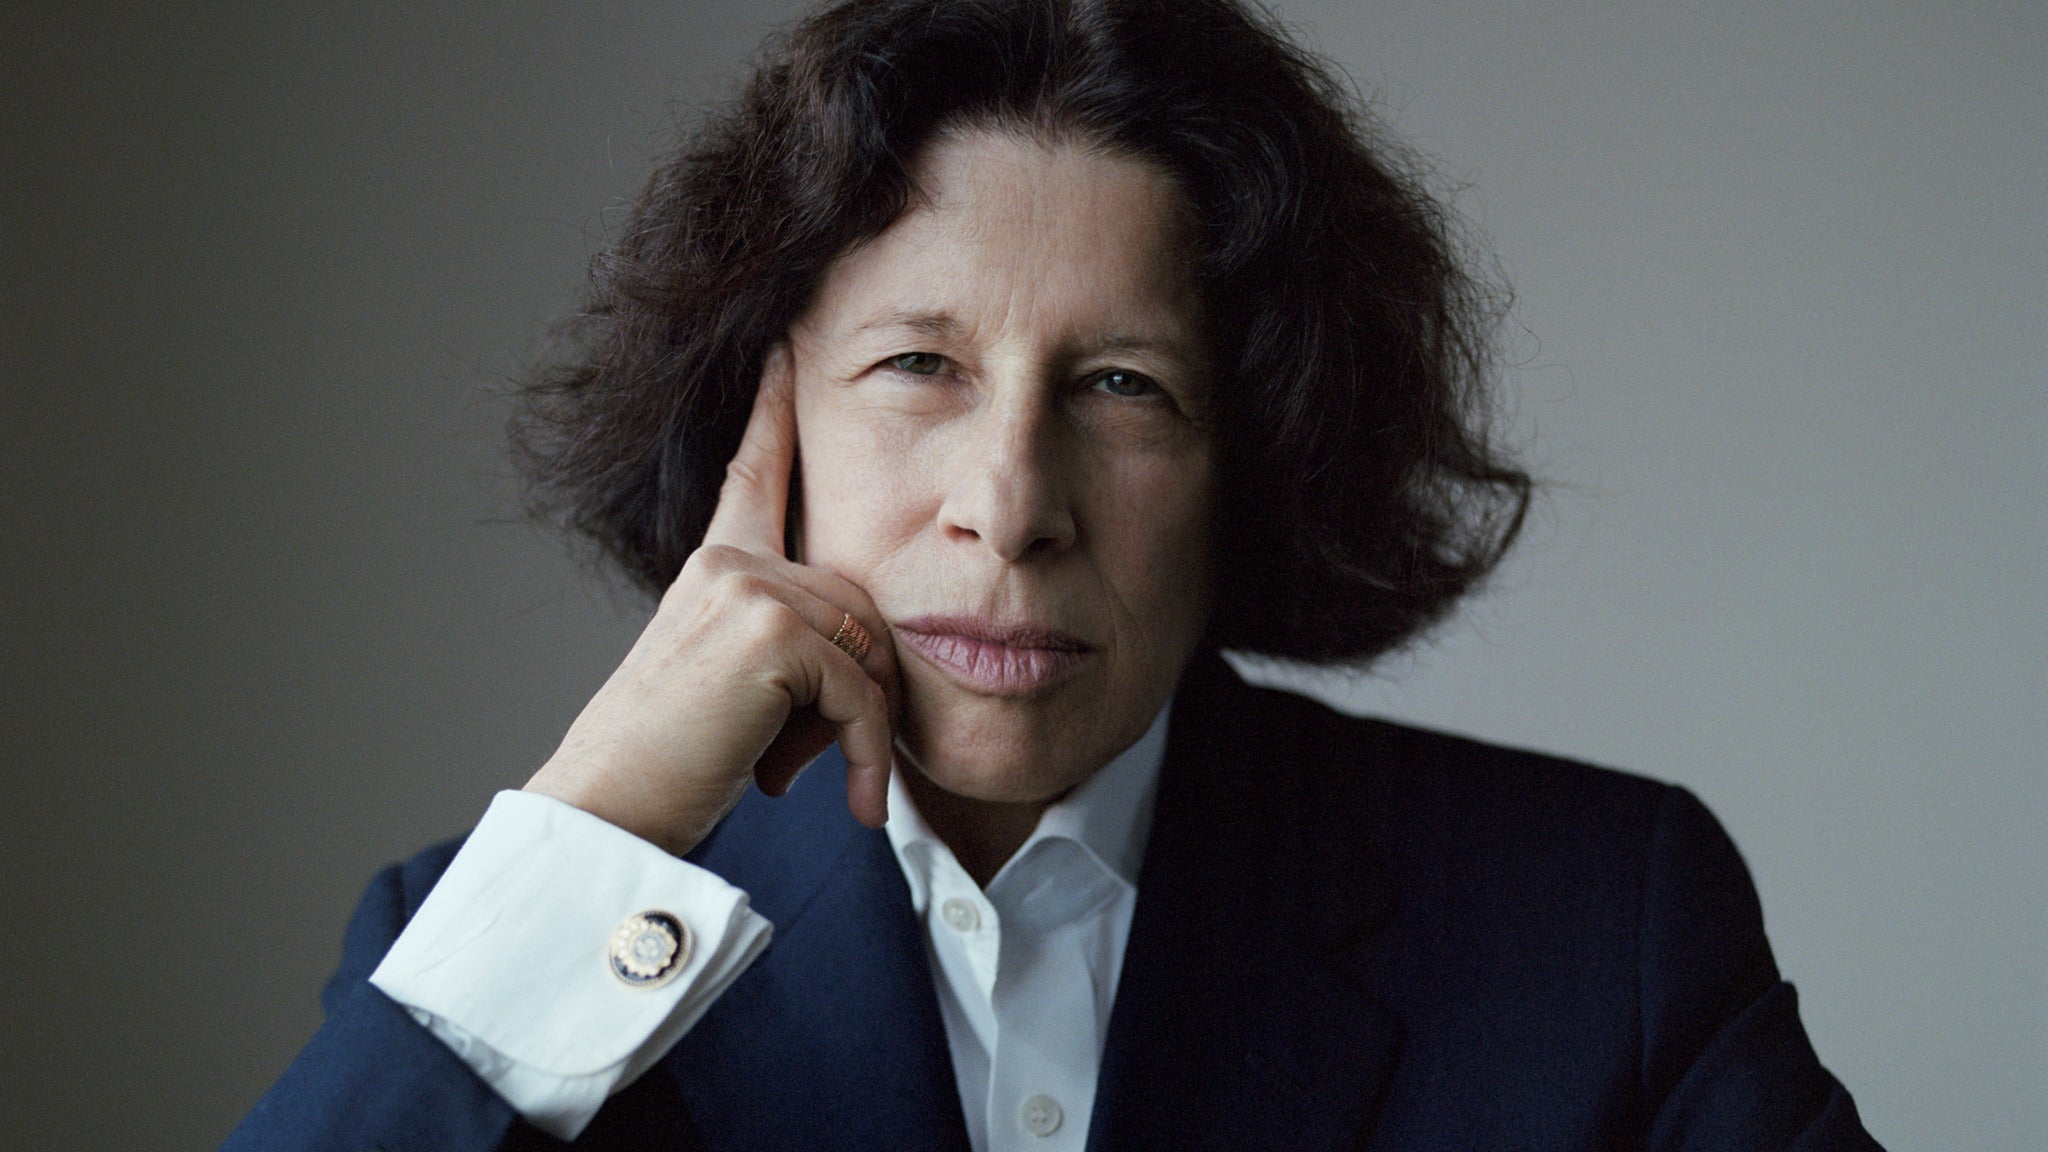 An Evening With Fran Lebowitz in Baltimore promo photo for Exclusive presale offer code